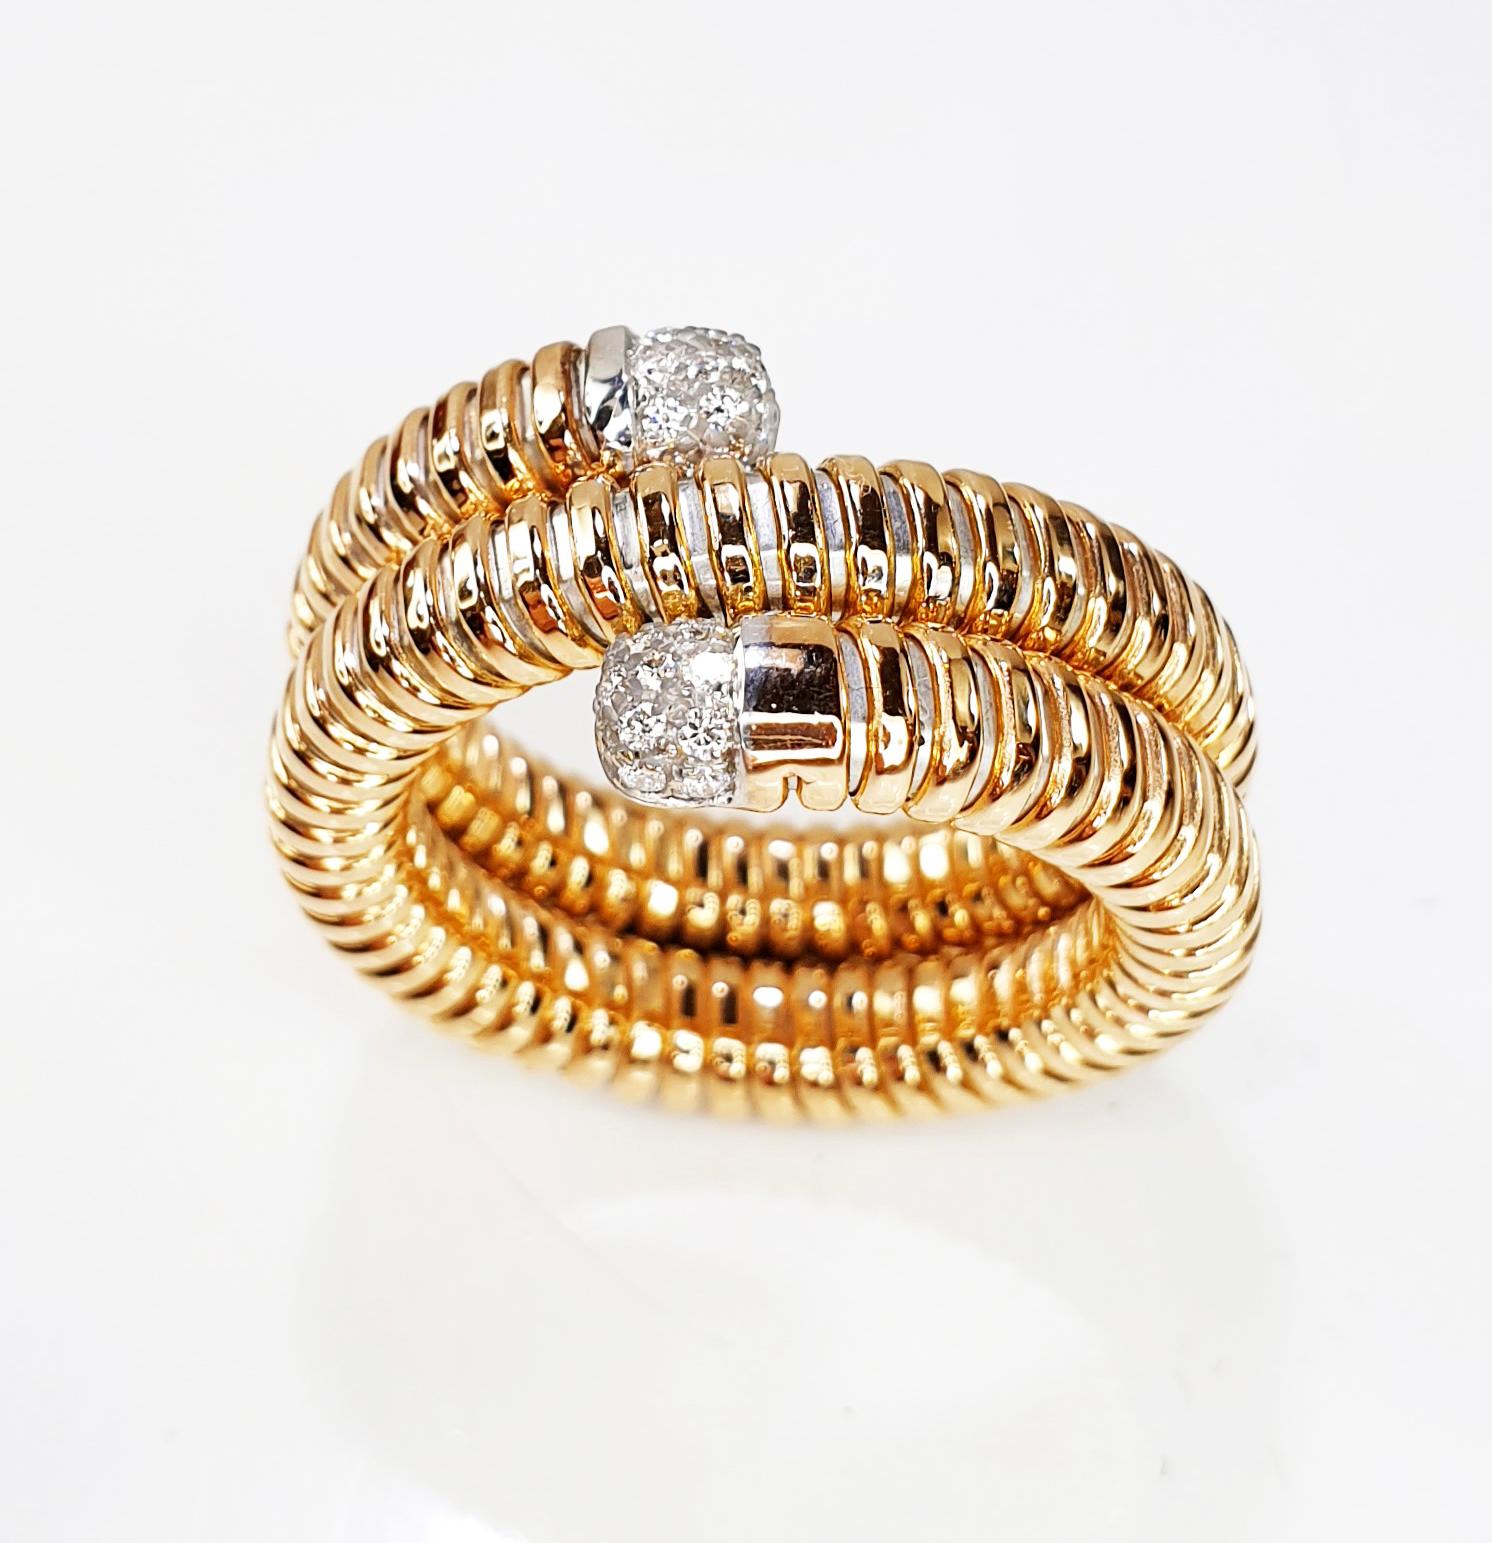 Flexible and adaptable ring with tubogas craftmanship that fits medium to large sizes.
Available in three colours of gold, yellow, white and rose. This listing is applicable to the  rose option. 
11,40gr and 0.25Carat Diamonds
Request availability